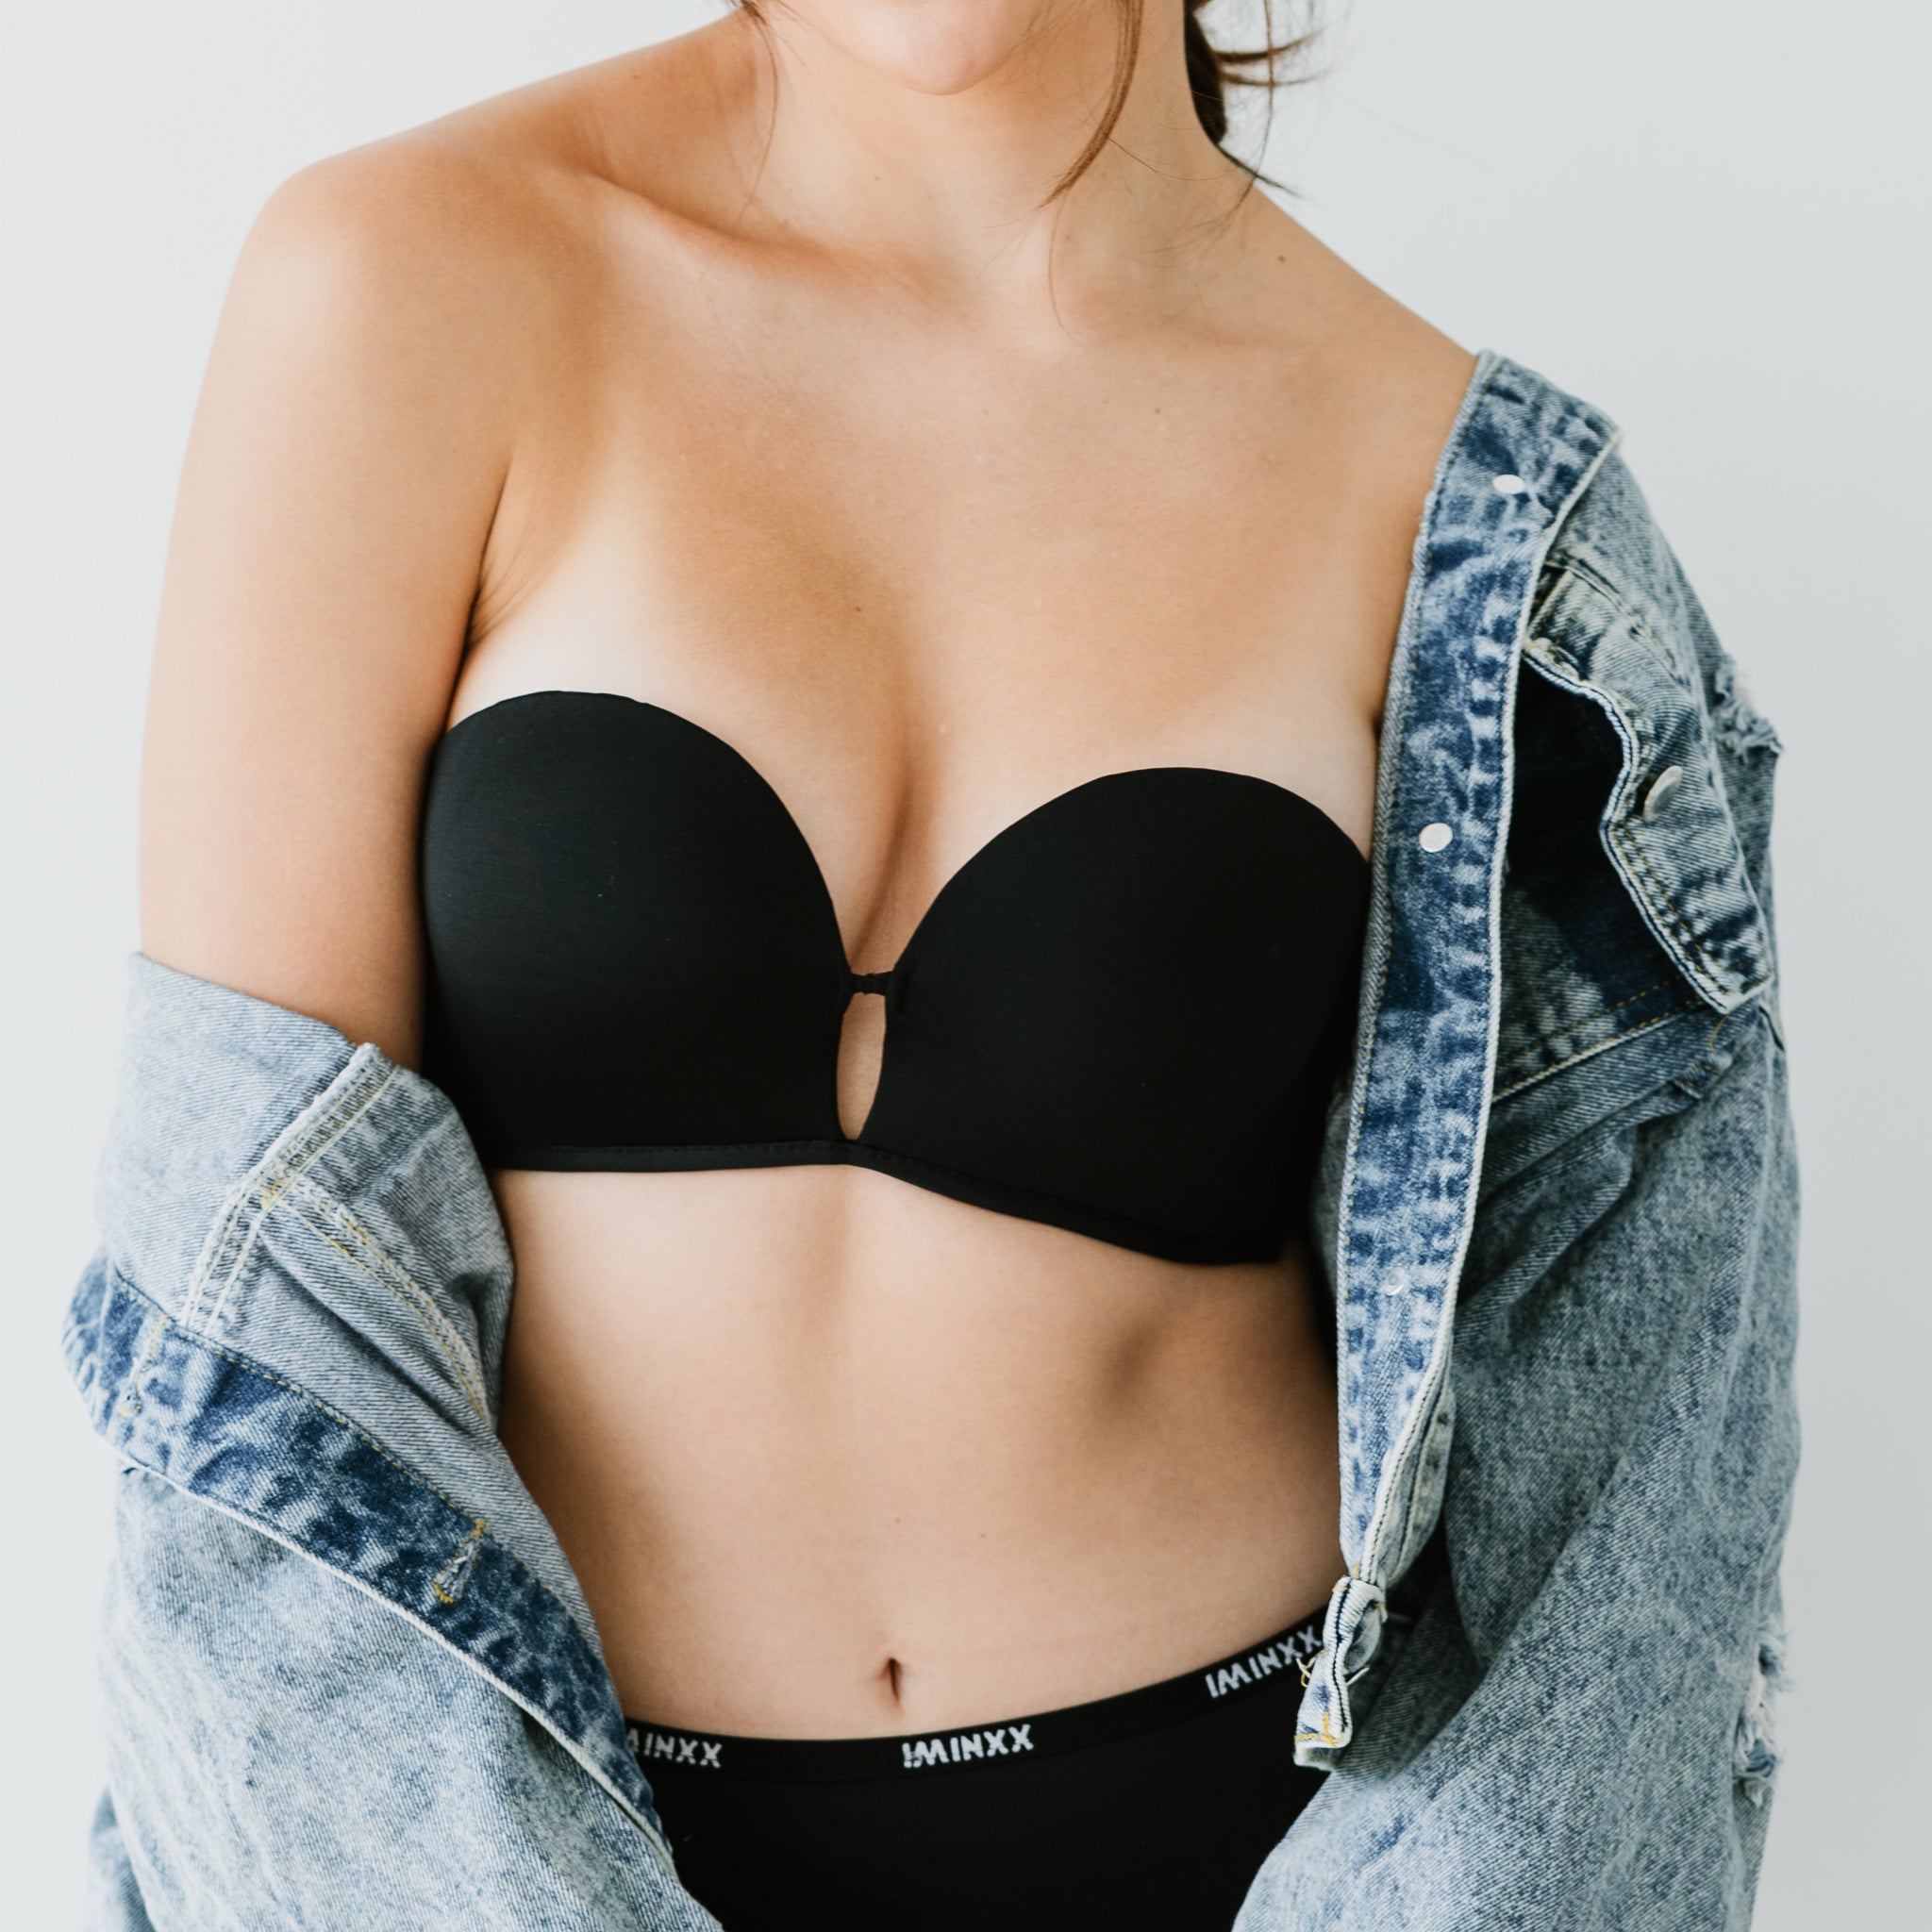 I'm a 34G and tried 's viral strapless bra - I was skeptical but it  fits really well